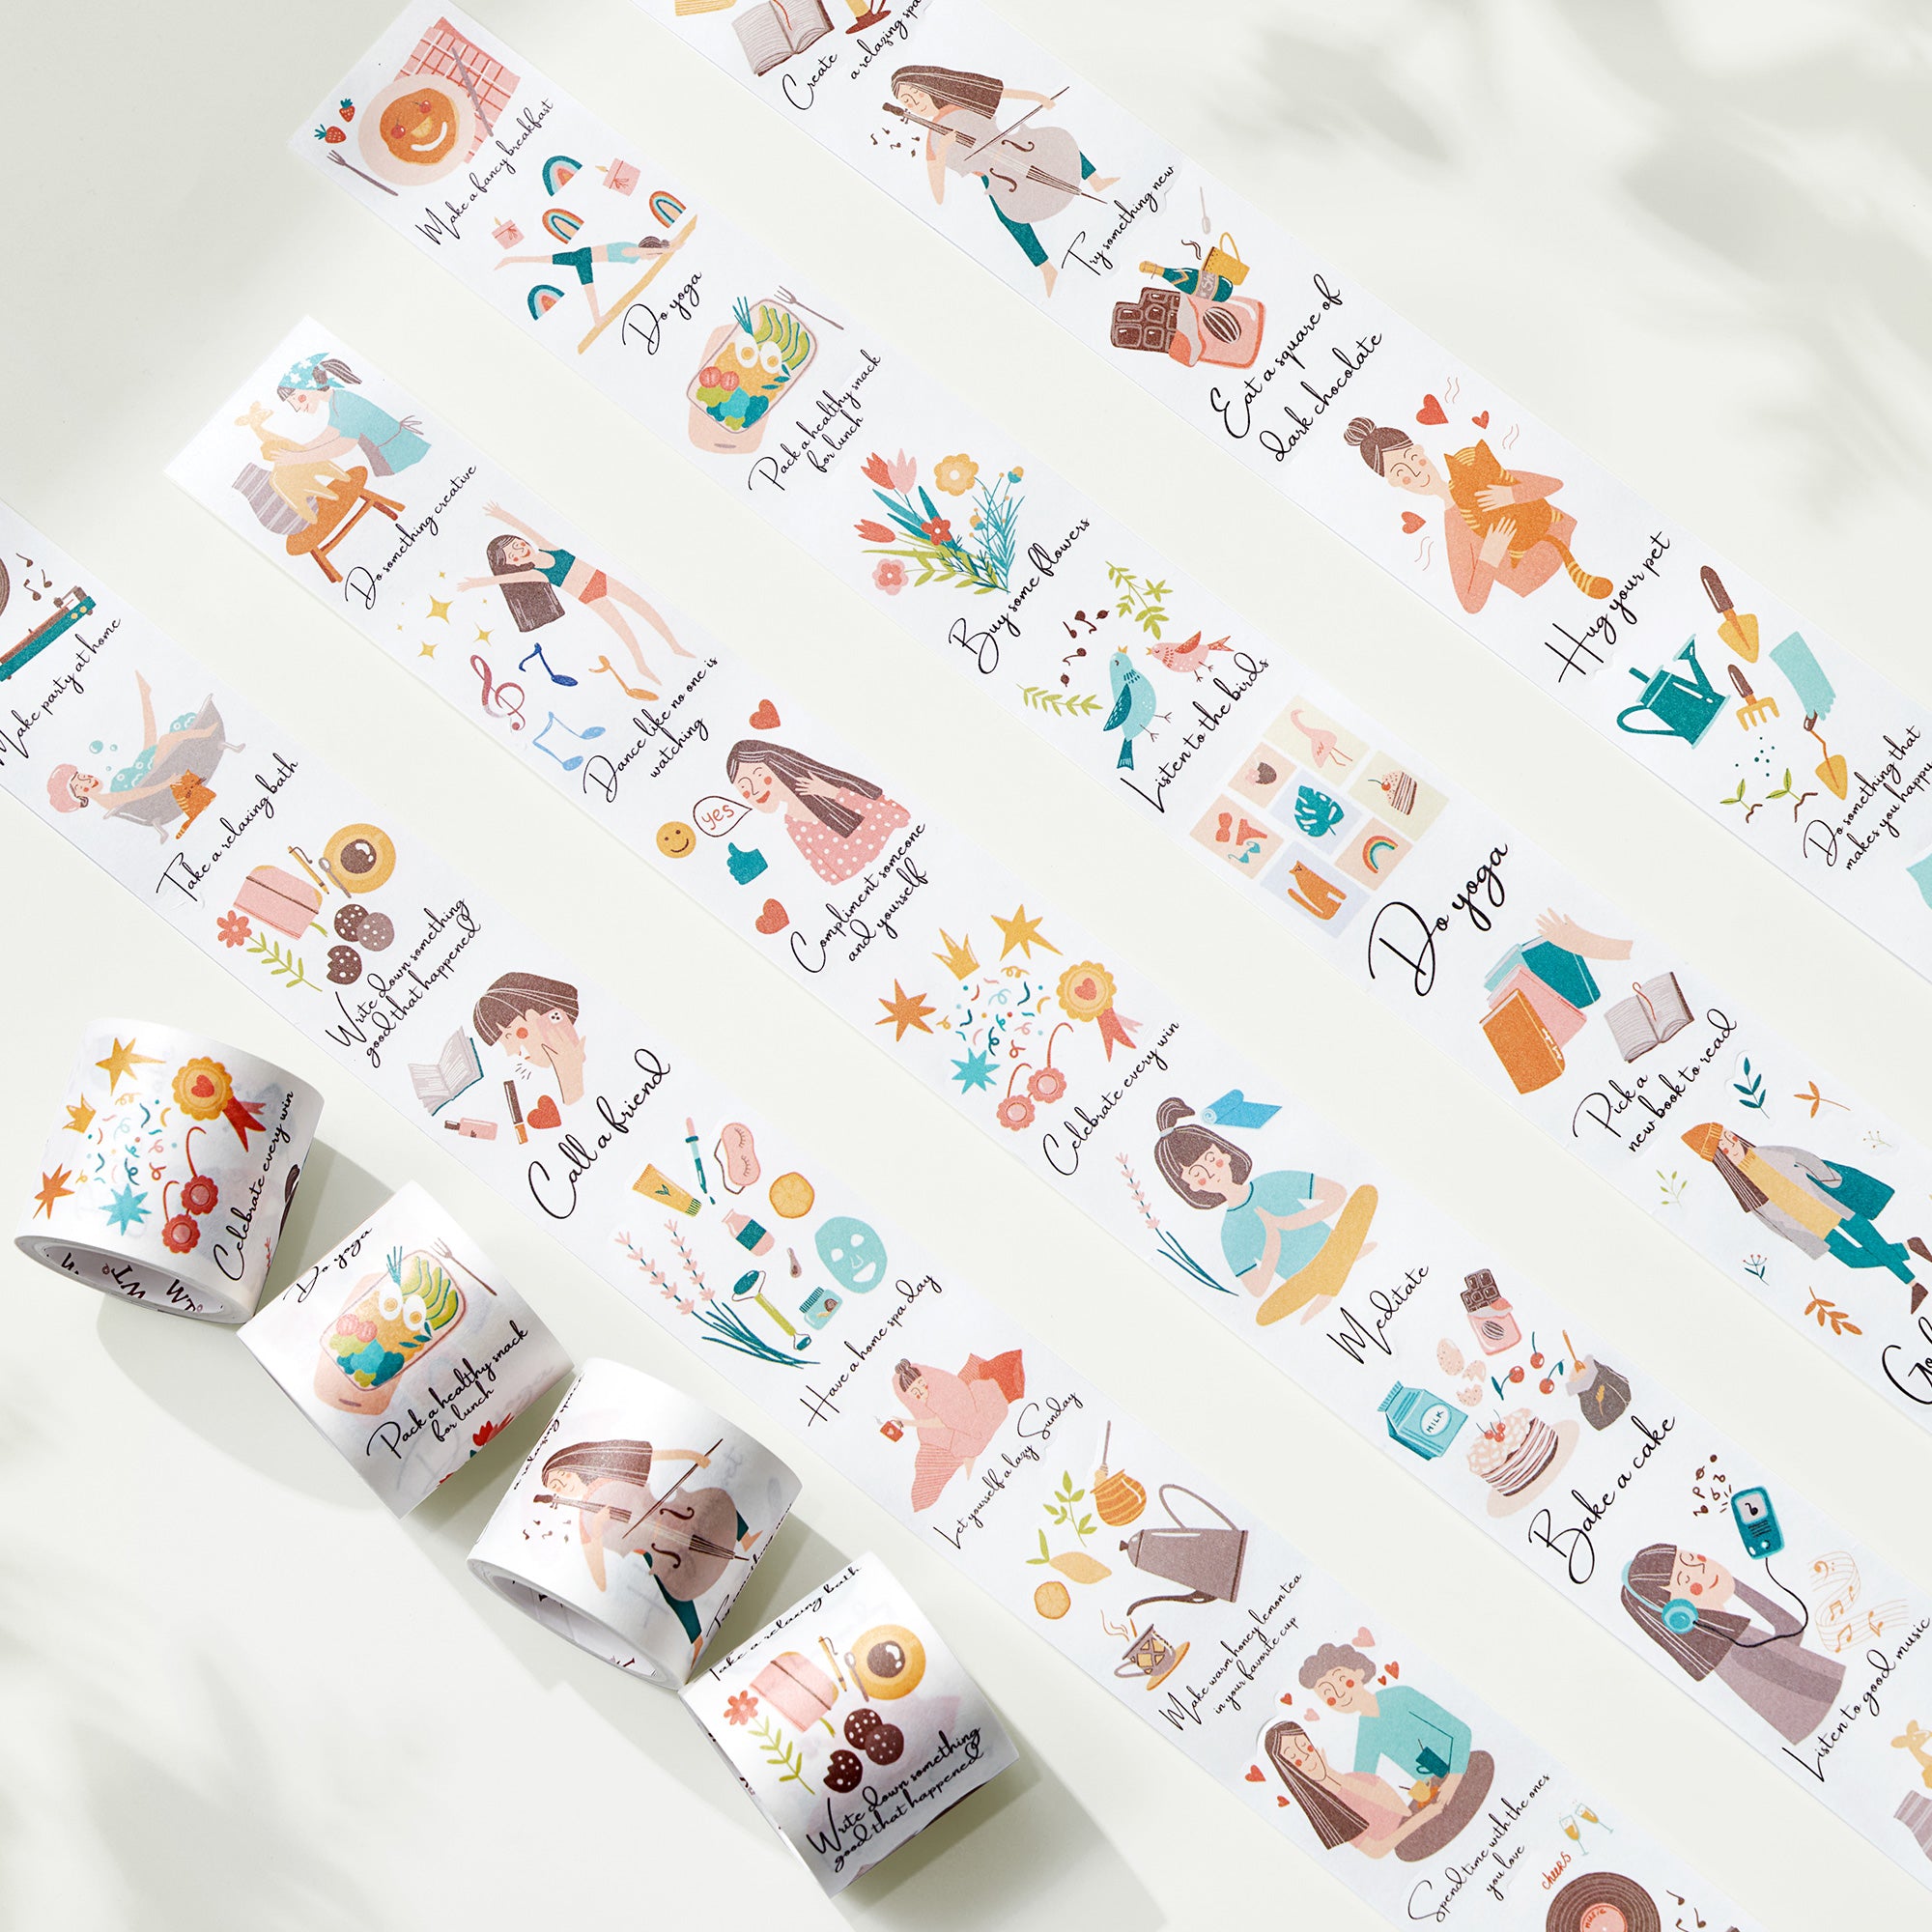 Life's Essense Washi Tape Sticker Set | The Washi Tape Shop. Beautiful Washi and Decorative Tape For Bullet Journals, Gift Wrapping, Planner Decoration and DIY Projects